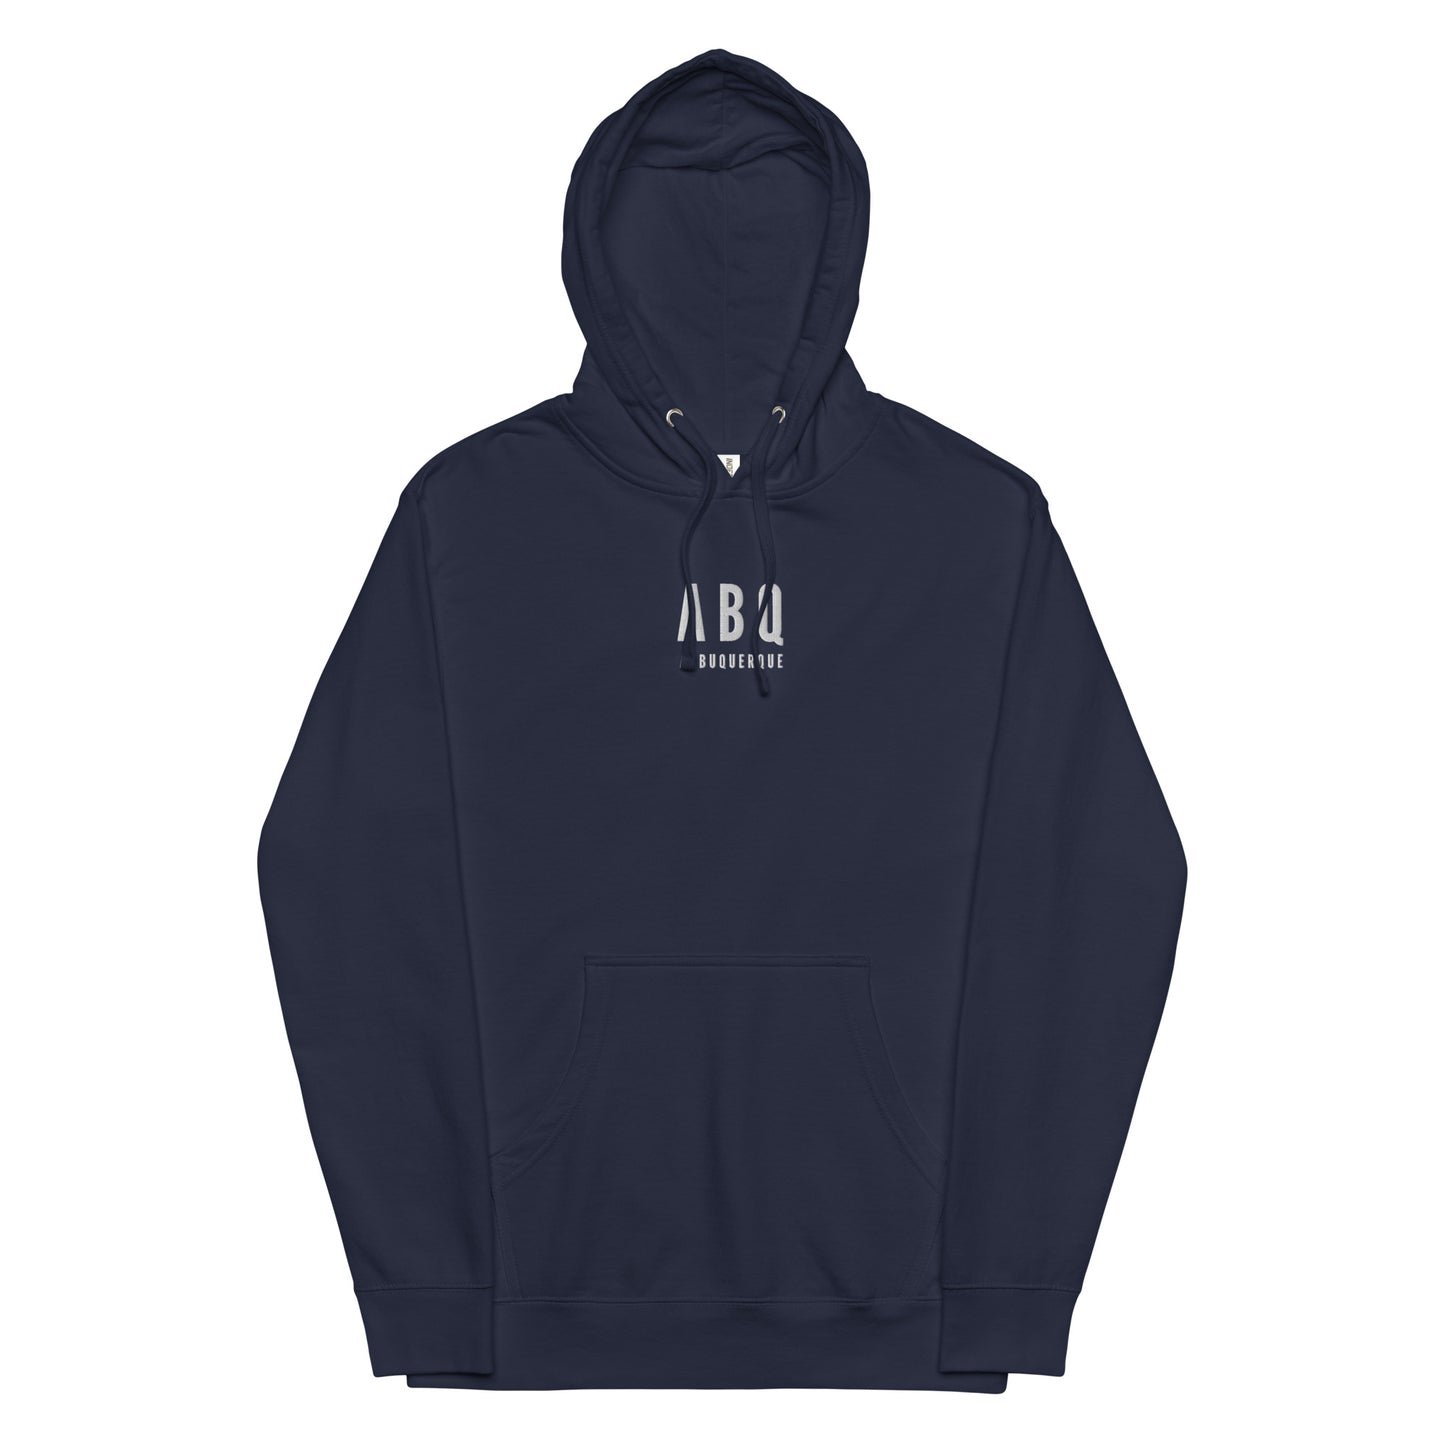 City Midweight Hoodie - White • ABQ Albuquerque • YHM Designs - Image 11